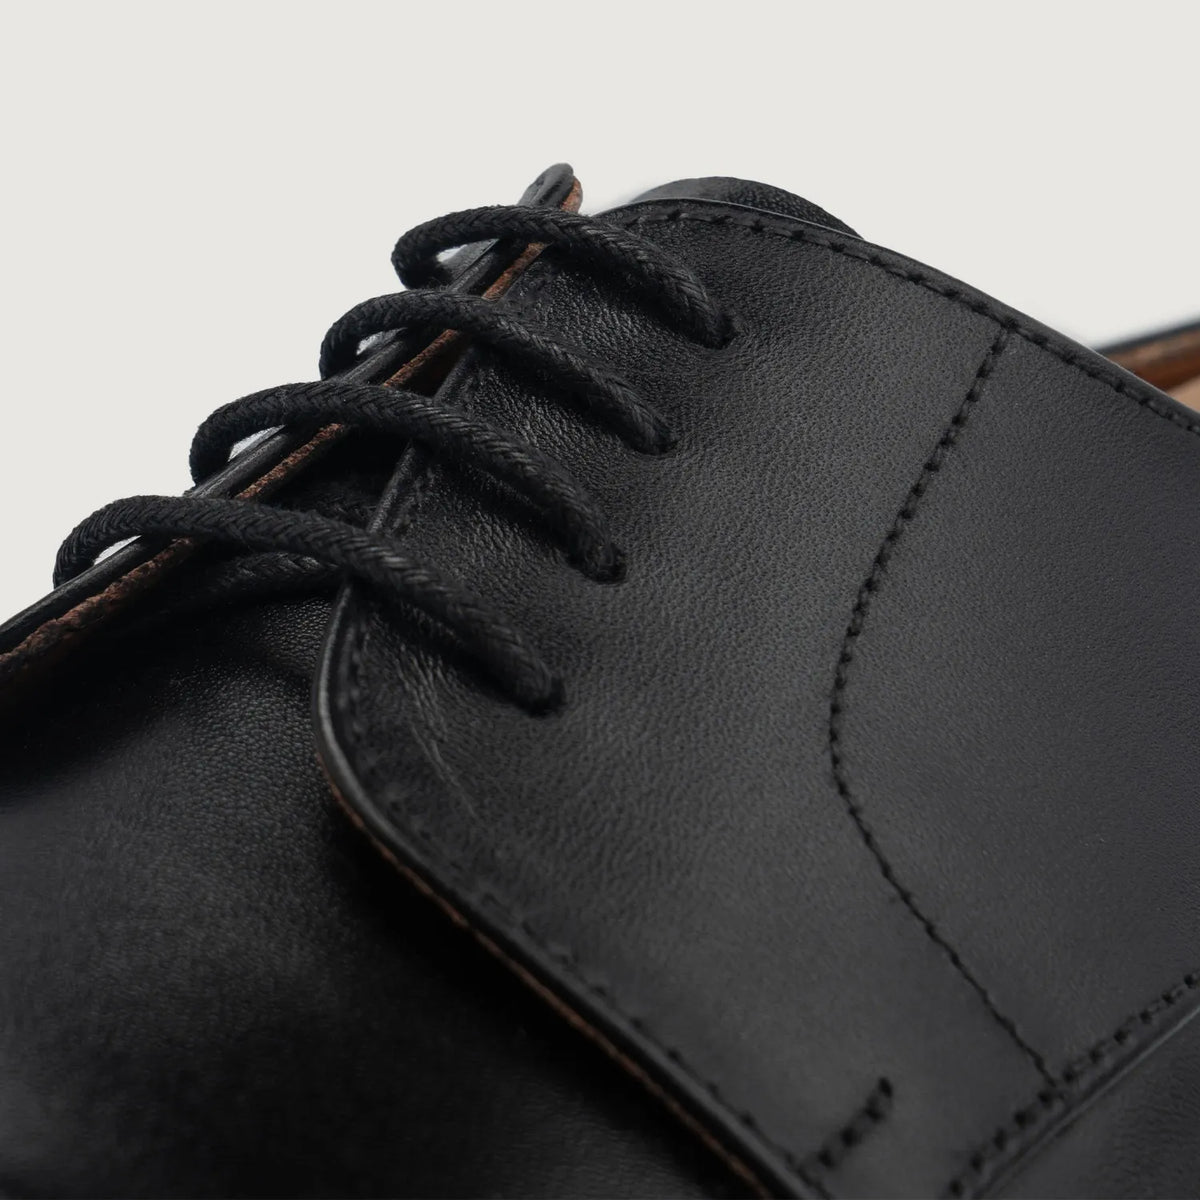 Attorney Derby Black Leather Shoes